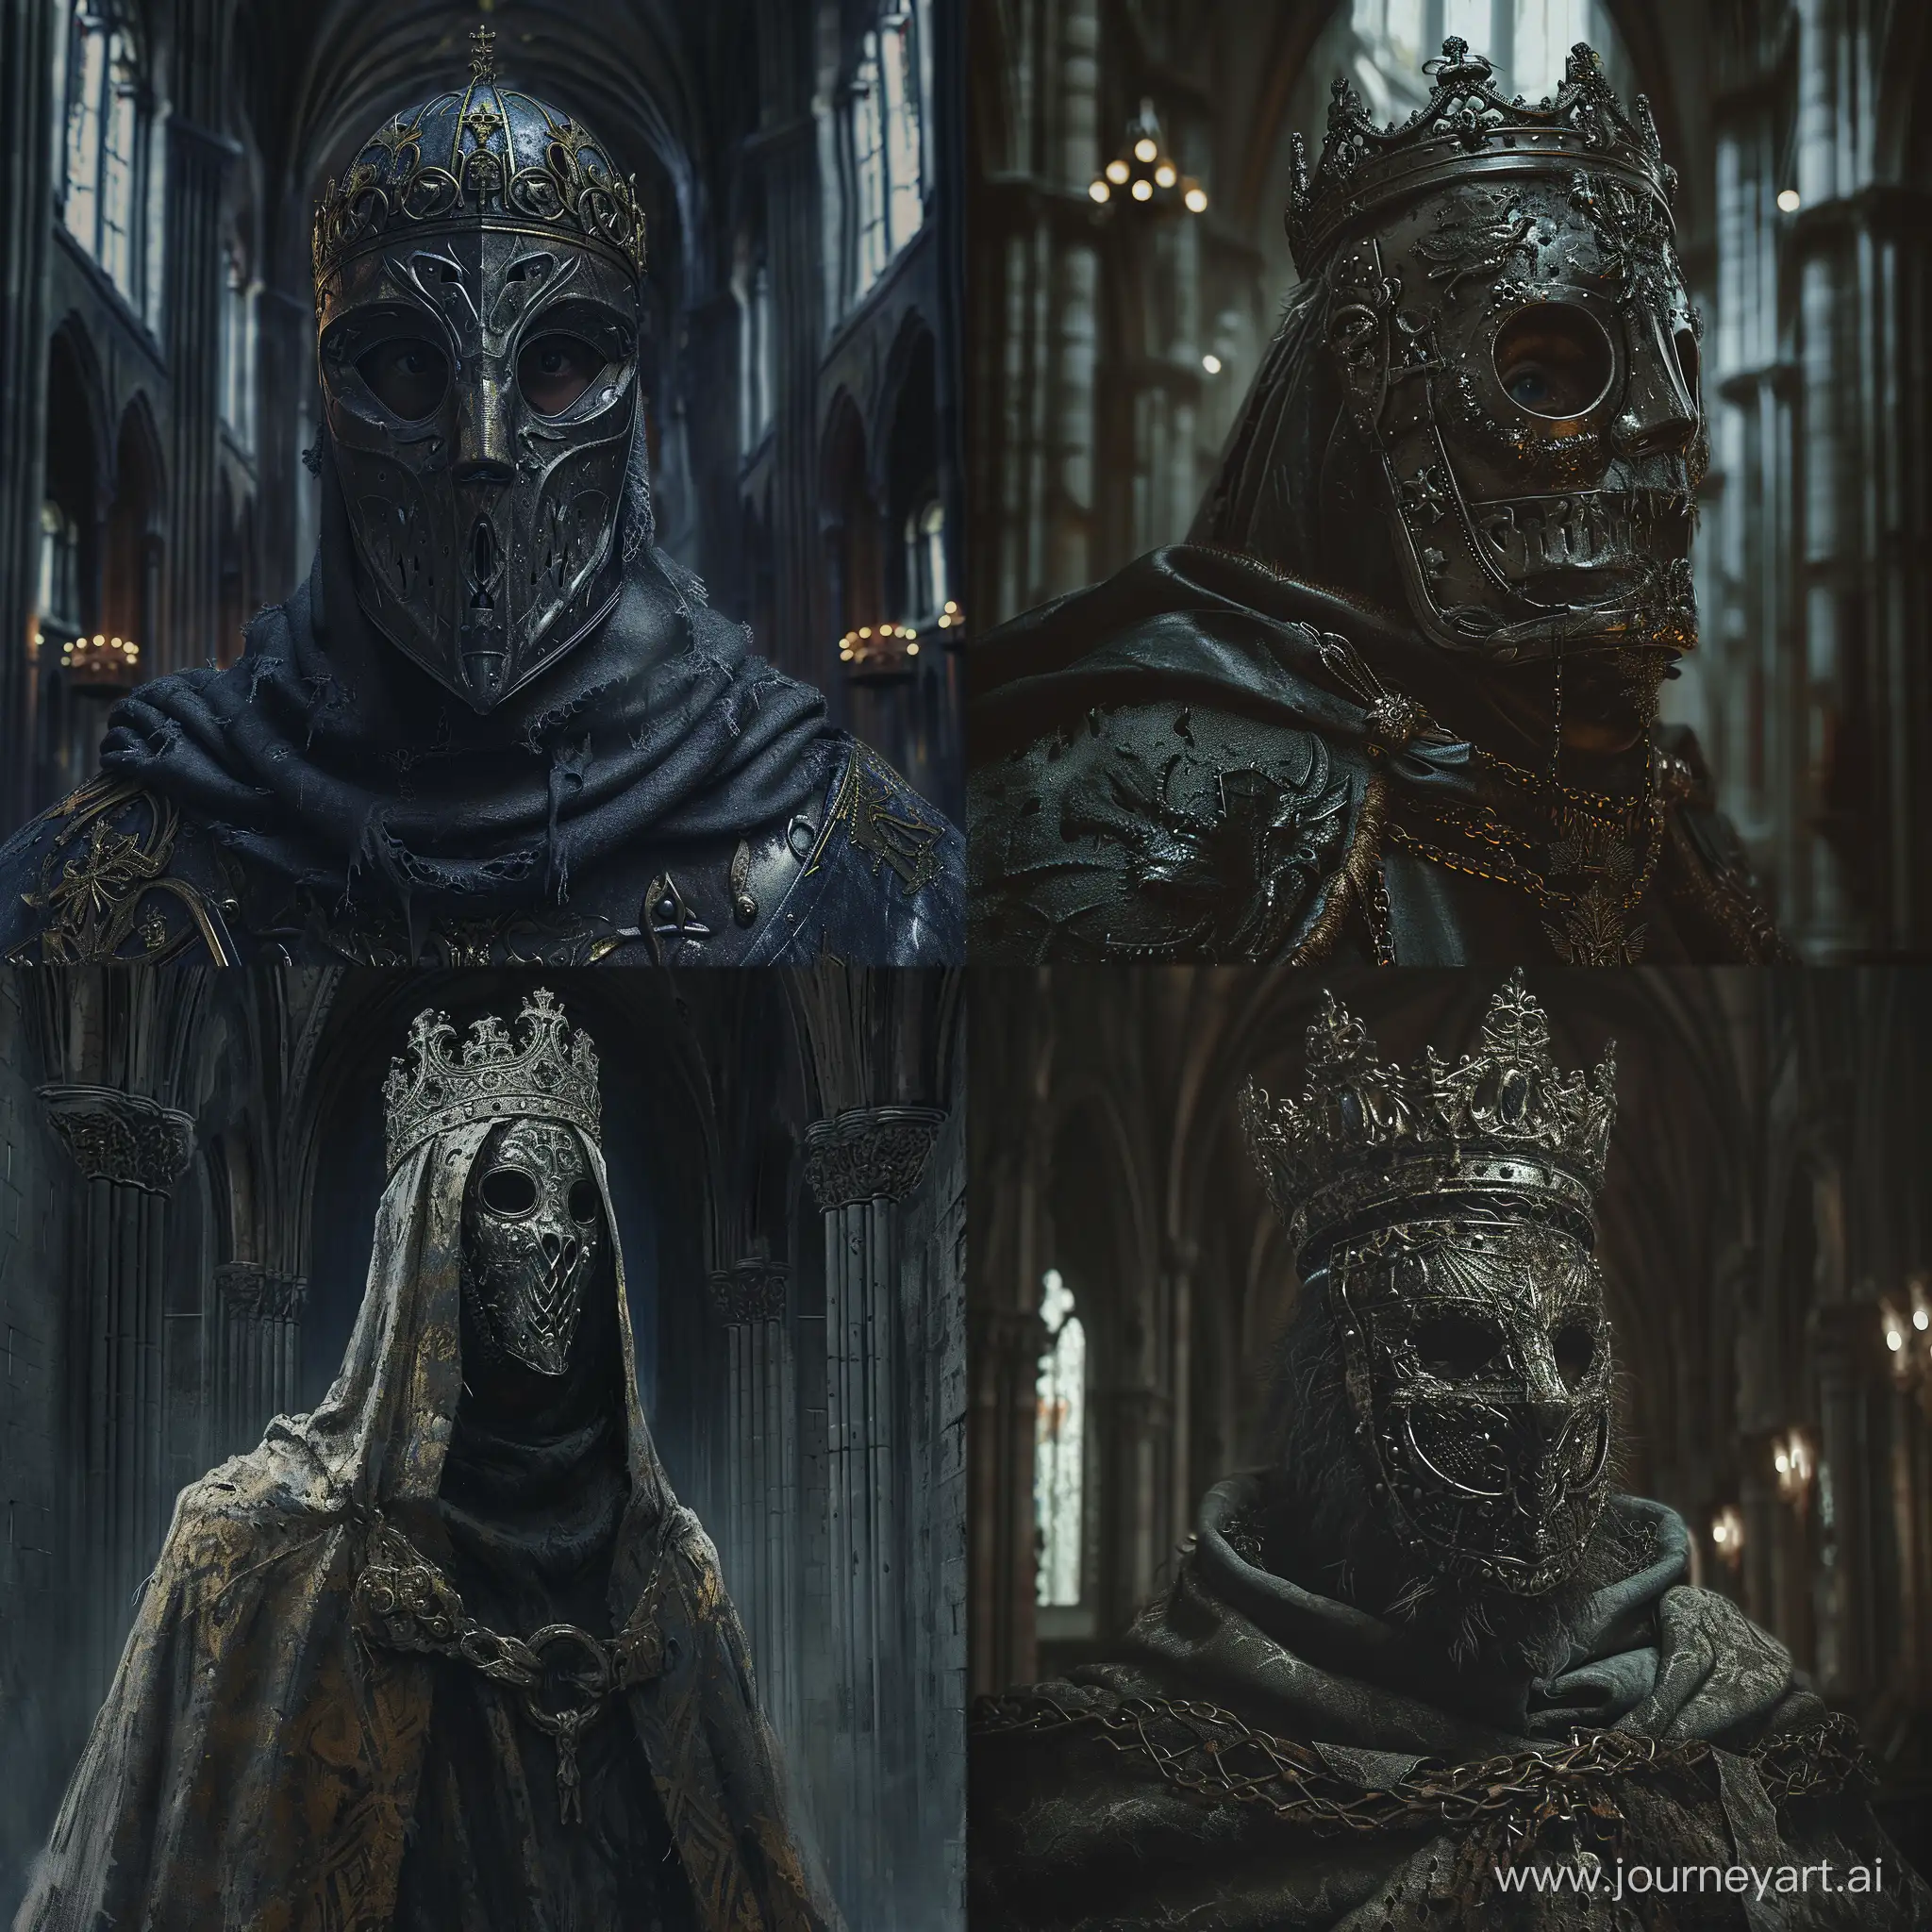 King-Baldwin-Portrait-with-Metal-Mask-in-Gritty-Cathedral-1970s-Dark-Fantasy-Art